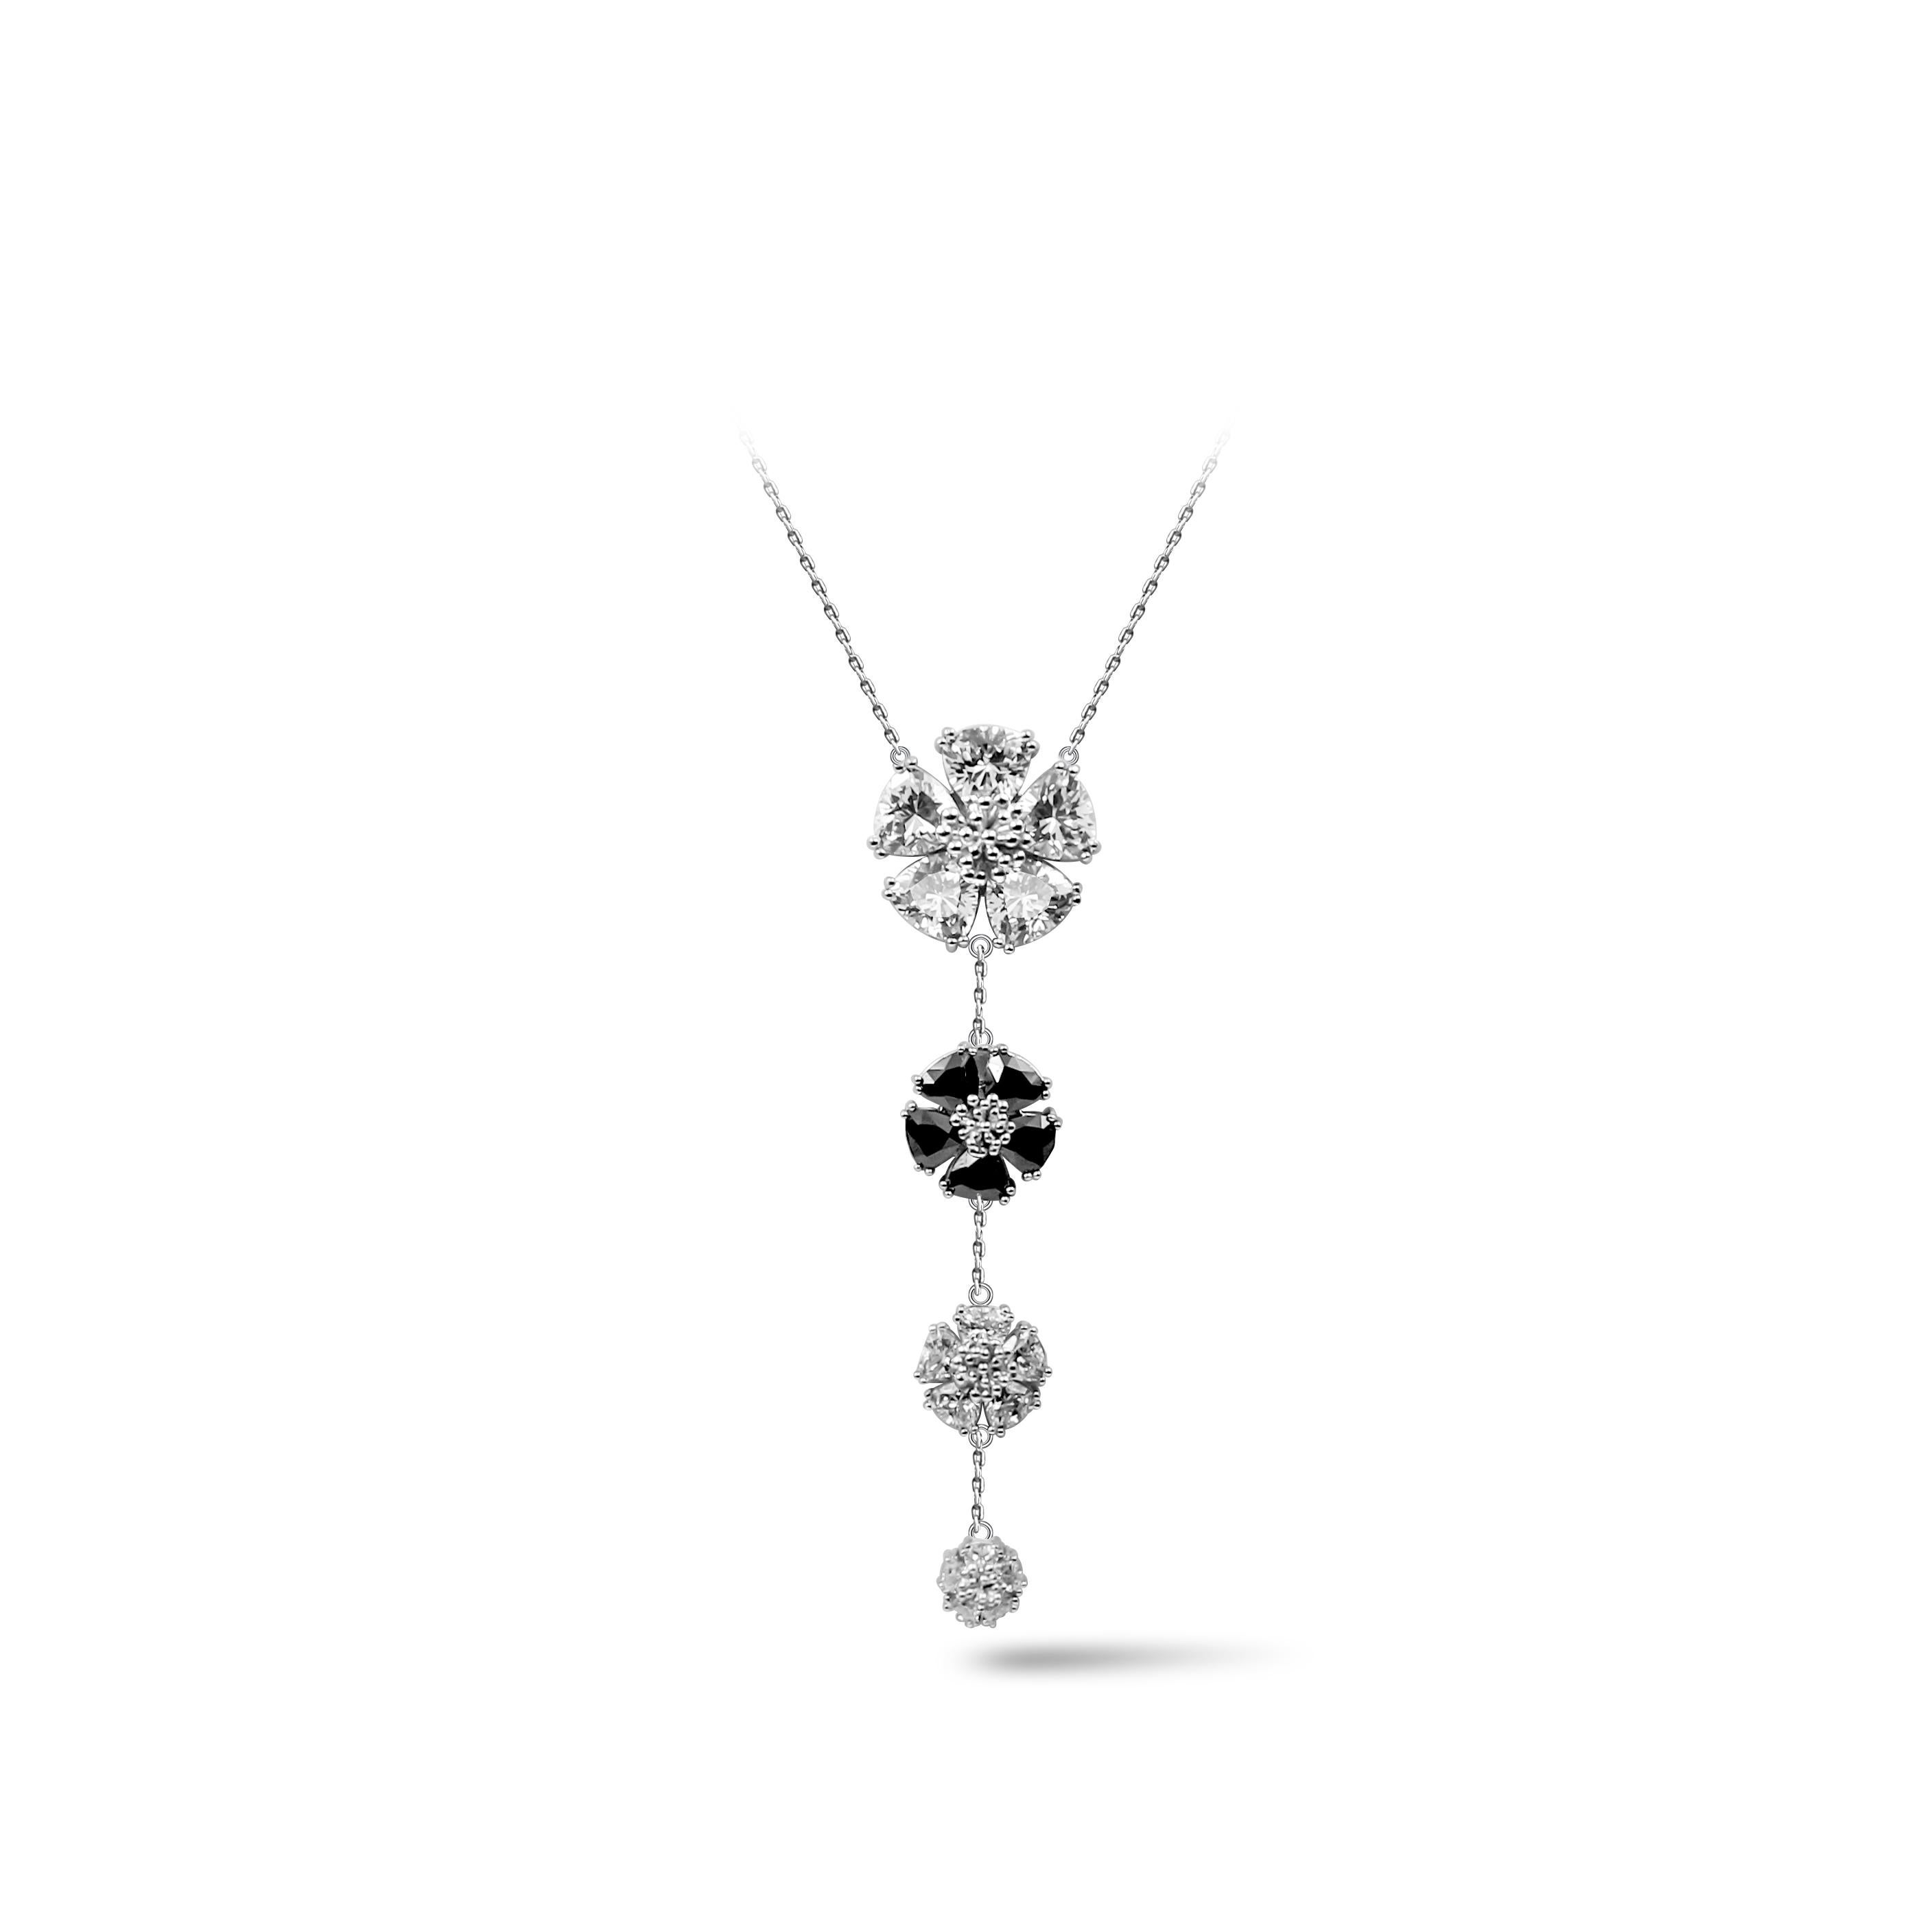 Designed in NYC

.925 Sterling Silver multiple Black & Gray Spinel and White Topaz Graduated Blossom Stone Lariat Necklace. No matter the season, allow natural beauty to surround you wherever you go. Graduated blossom stone lariat necklace: